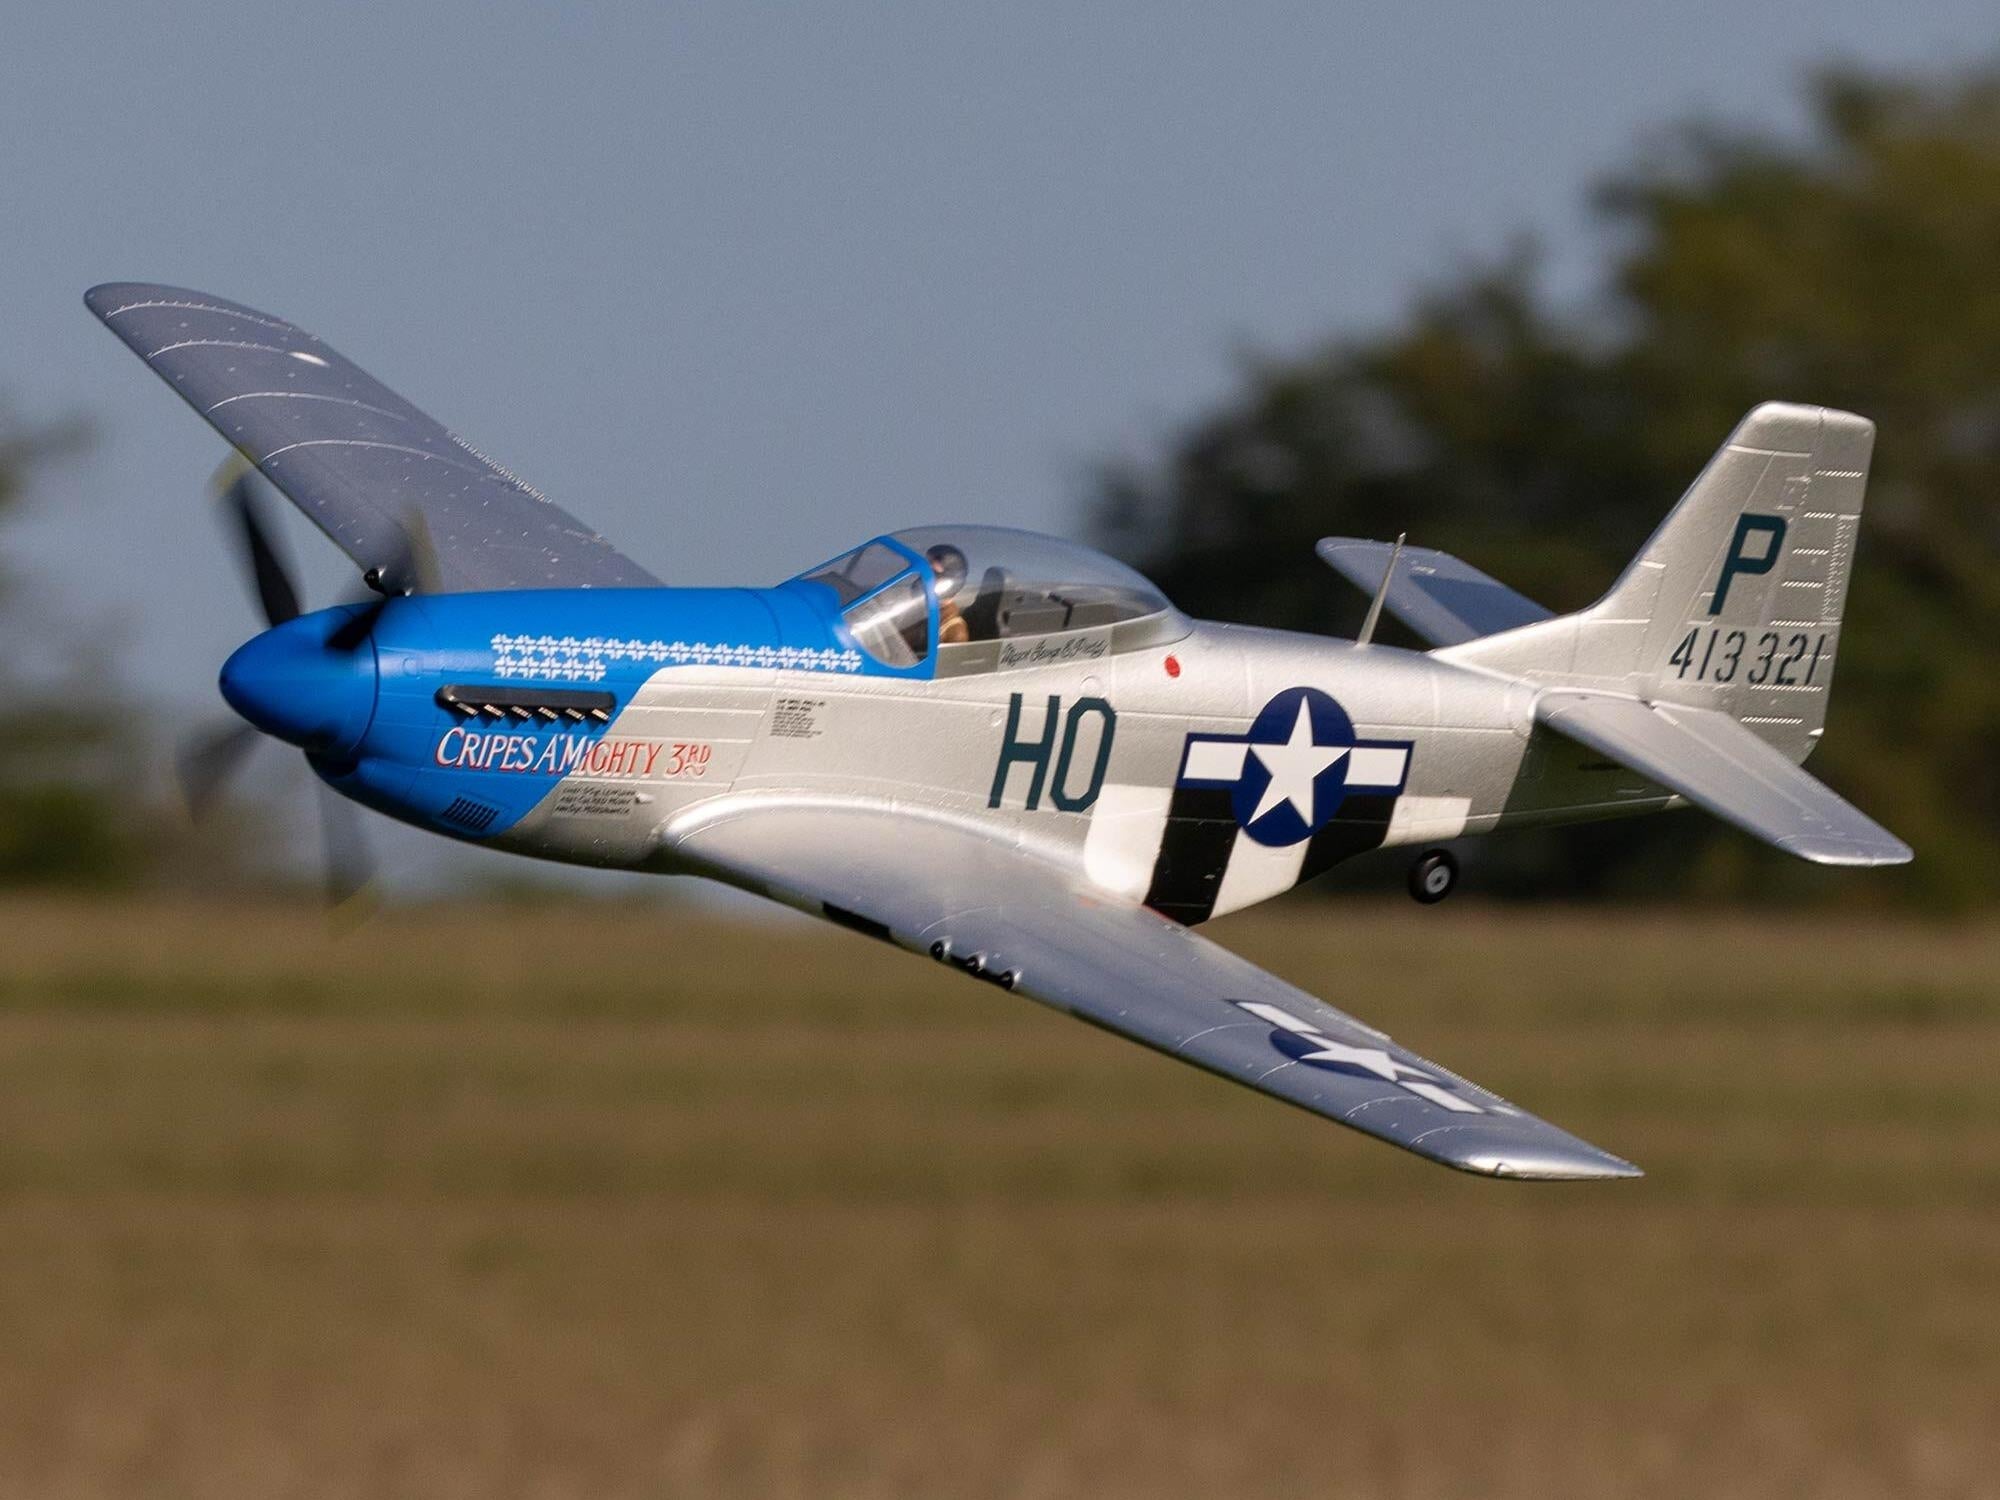 E-Flite P-51D Mustang 1.2m BNF Basic with AS3X and SAFE Select “Cripes A’Mighty 3rd” EFL089500